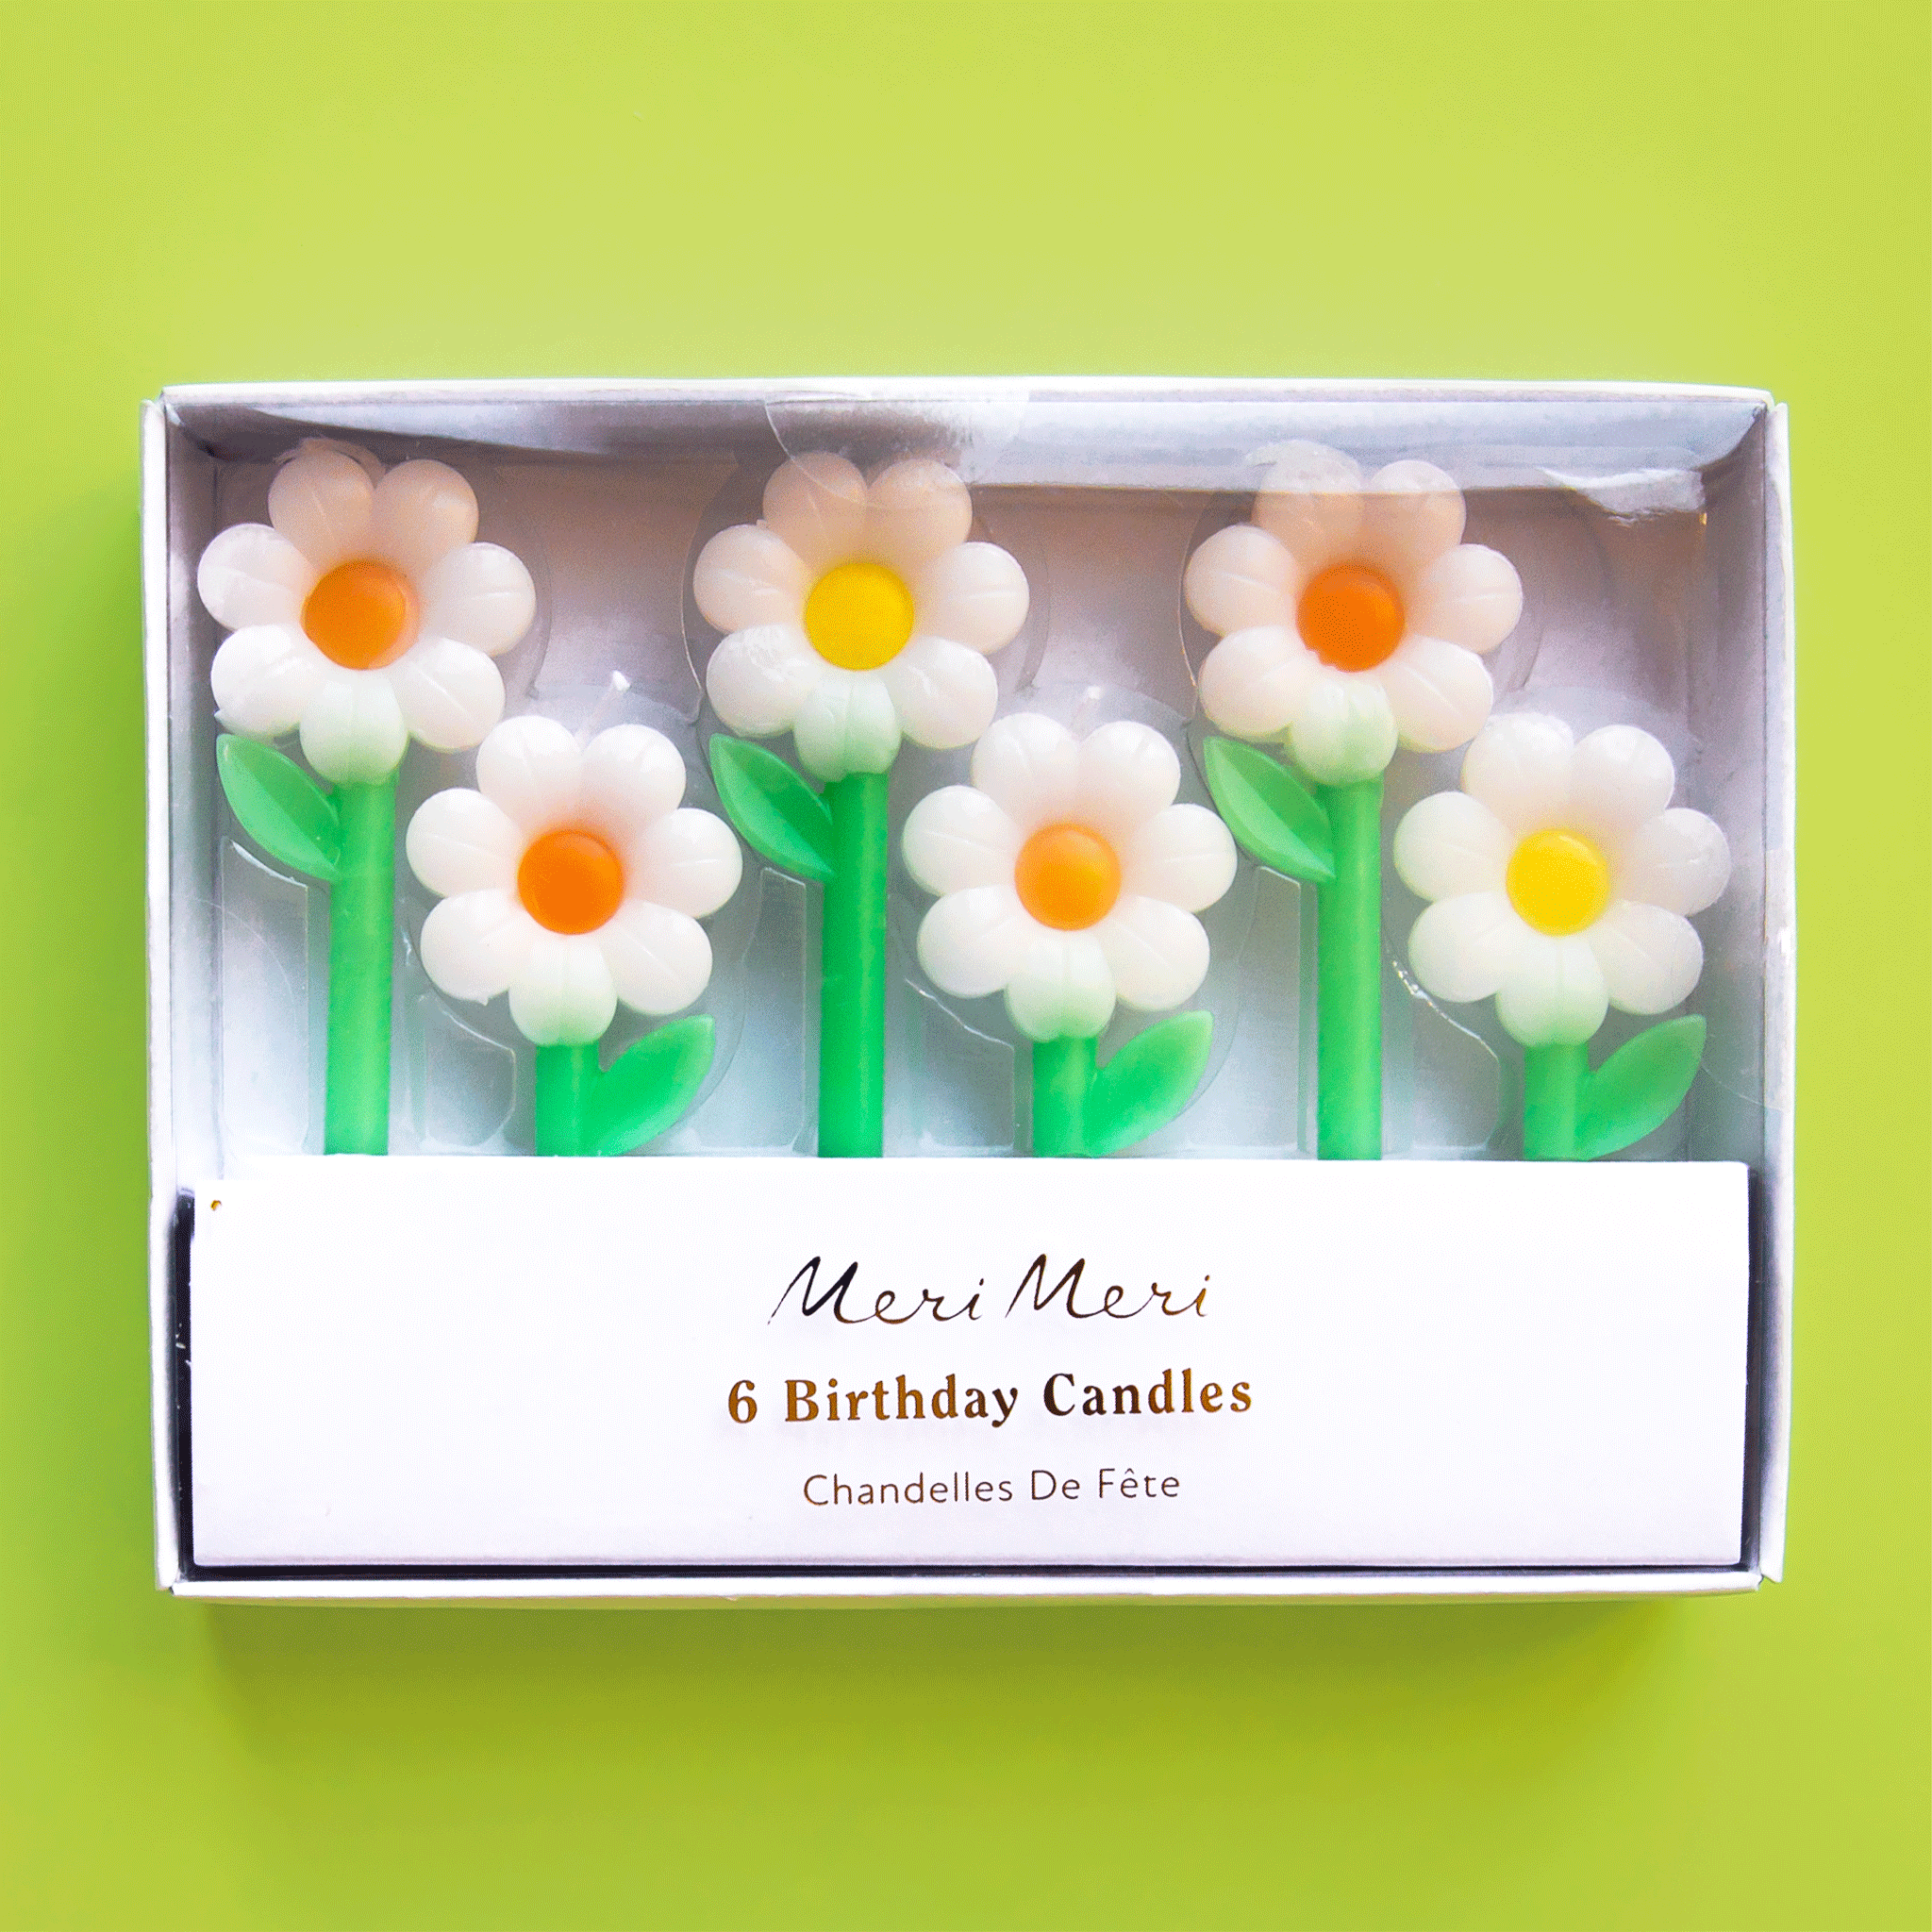 On a green background is a pack of daisy shaped candles in two different sizes.